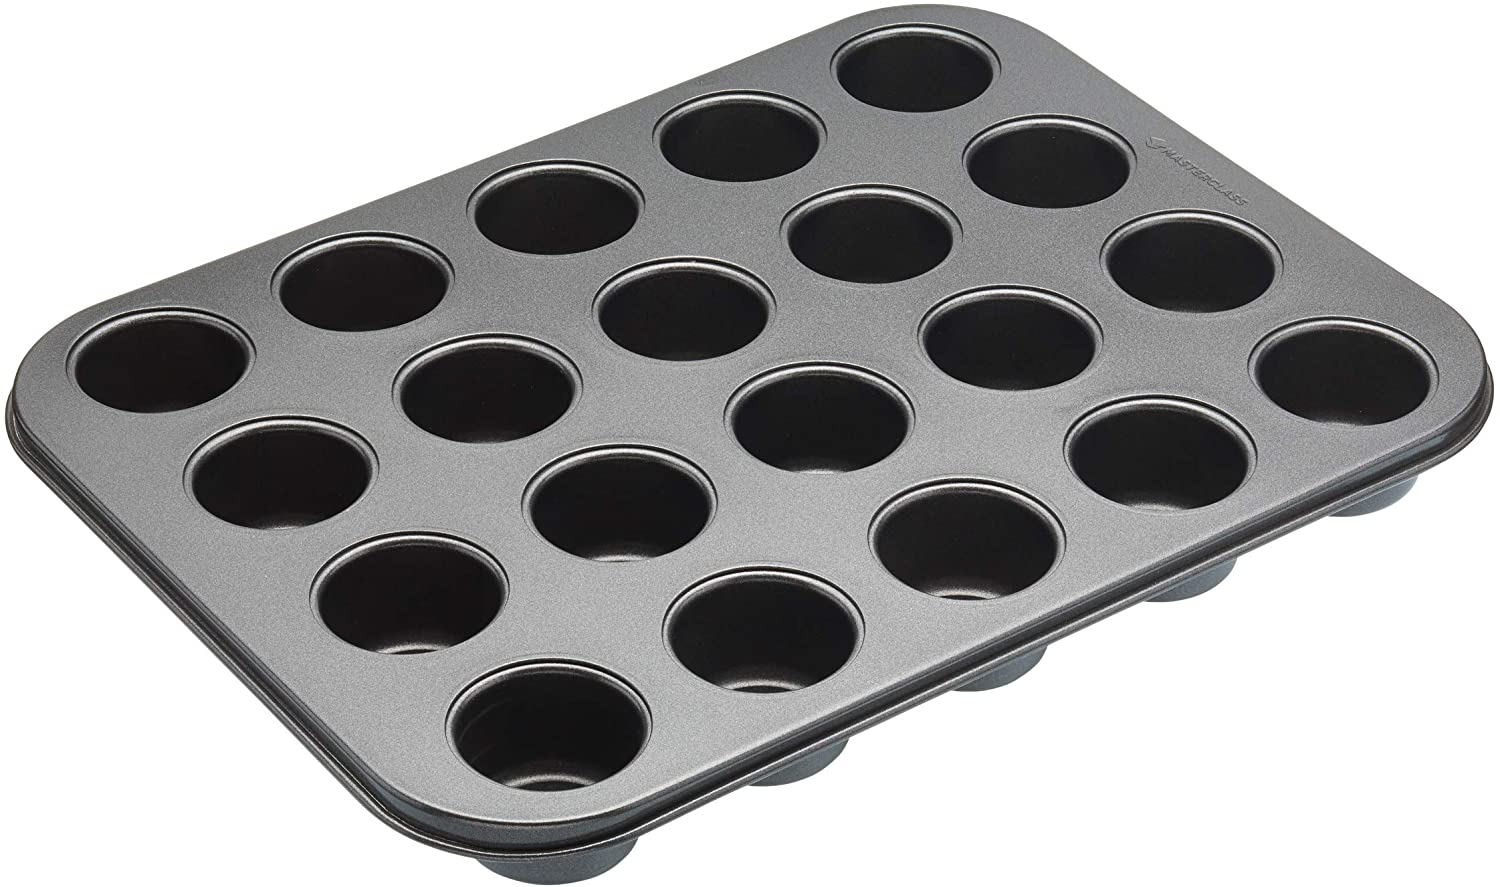 KitchenCraft Masterclass Non-Stick Mini Tart Baking Tray with Holes and Loose Bases, Steel, Grey, 27 x 35 x 4 cm